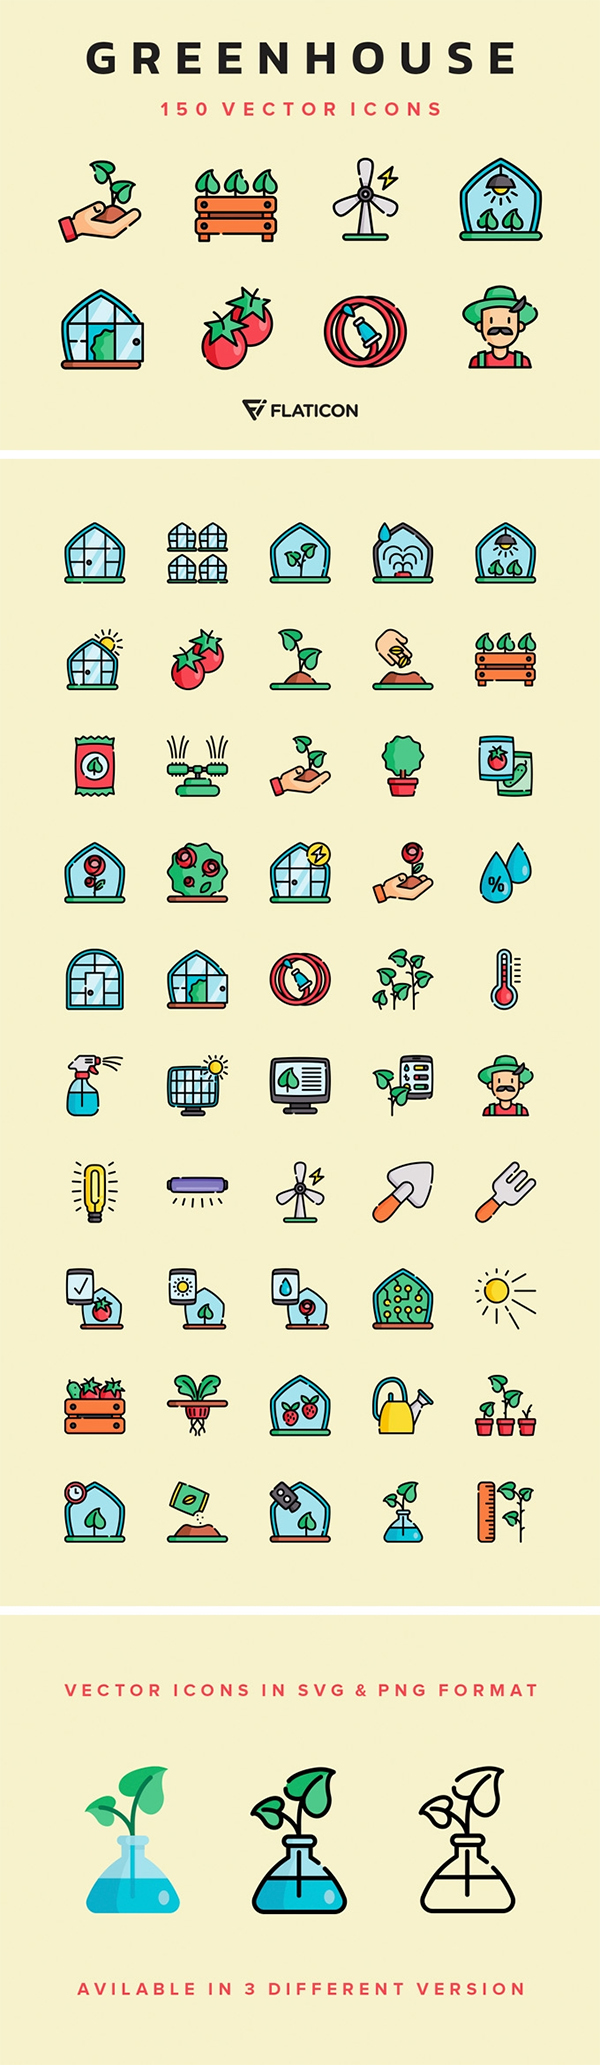 Green House Vector Icons